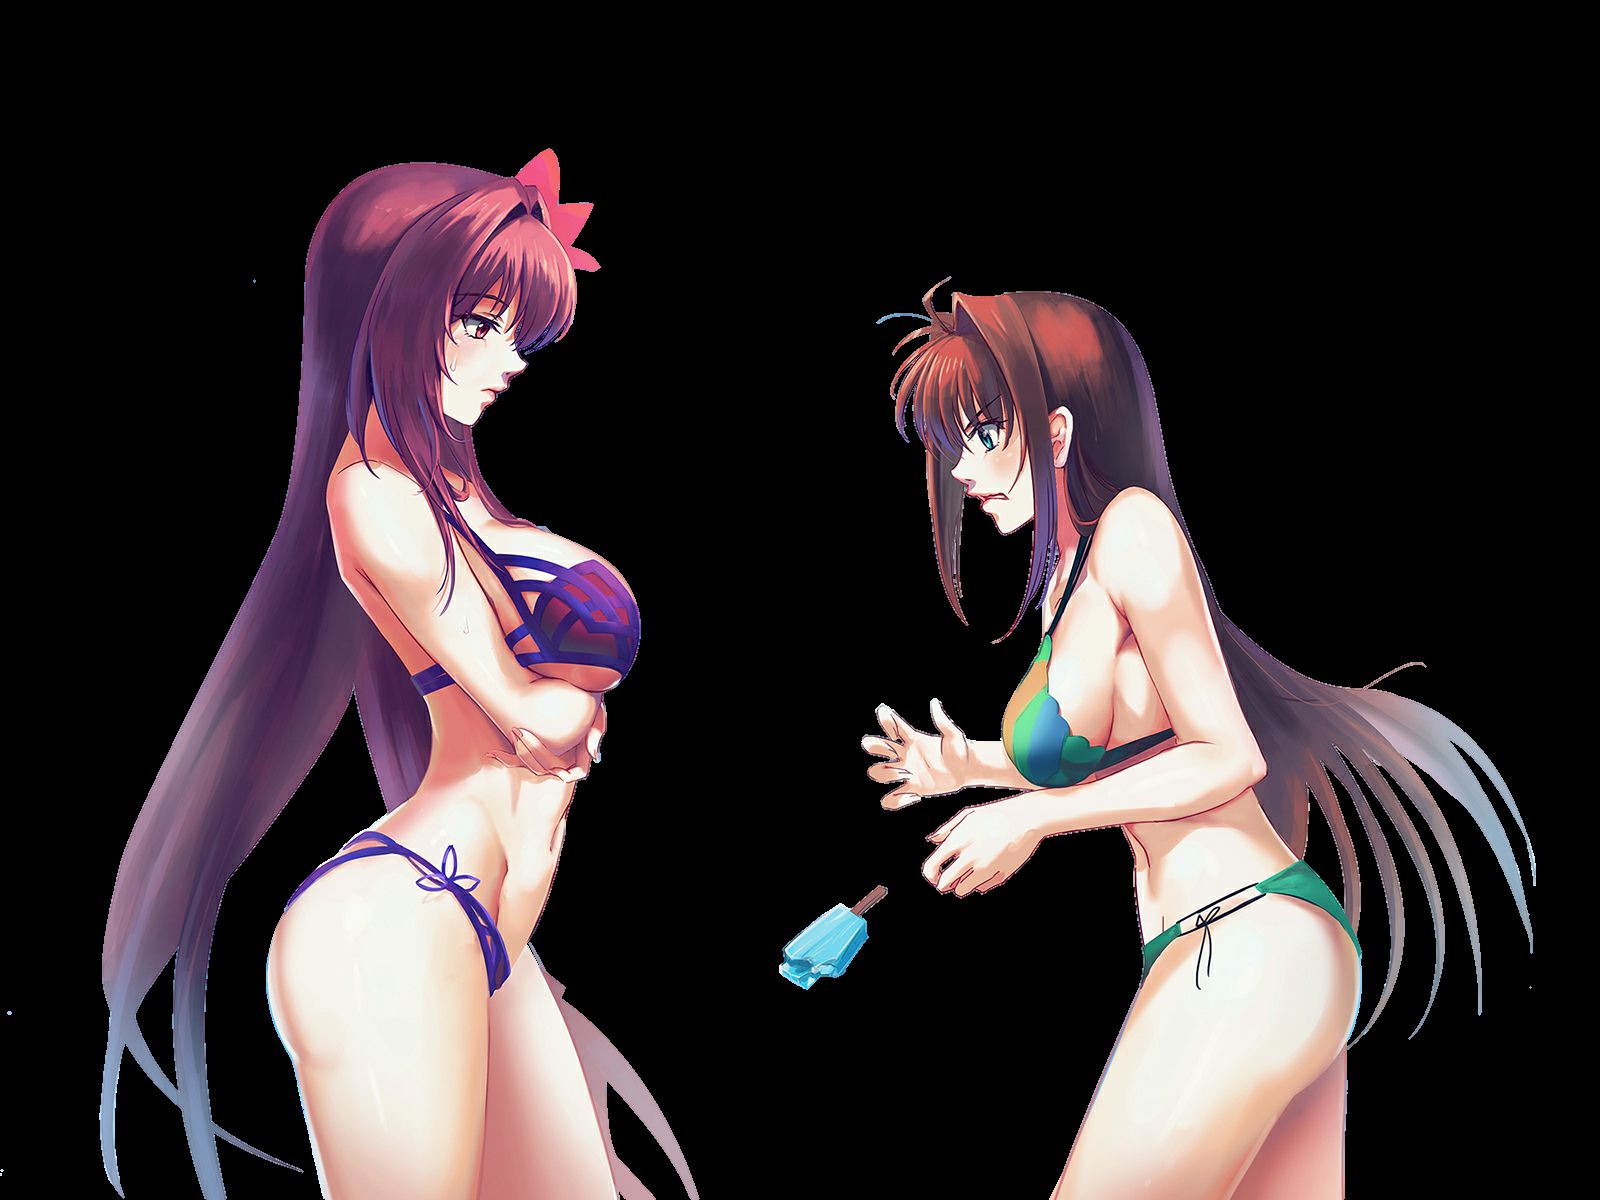 [Erotica character material] PNG background transmission erotic image such as anime character Part 315 40